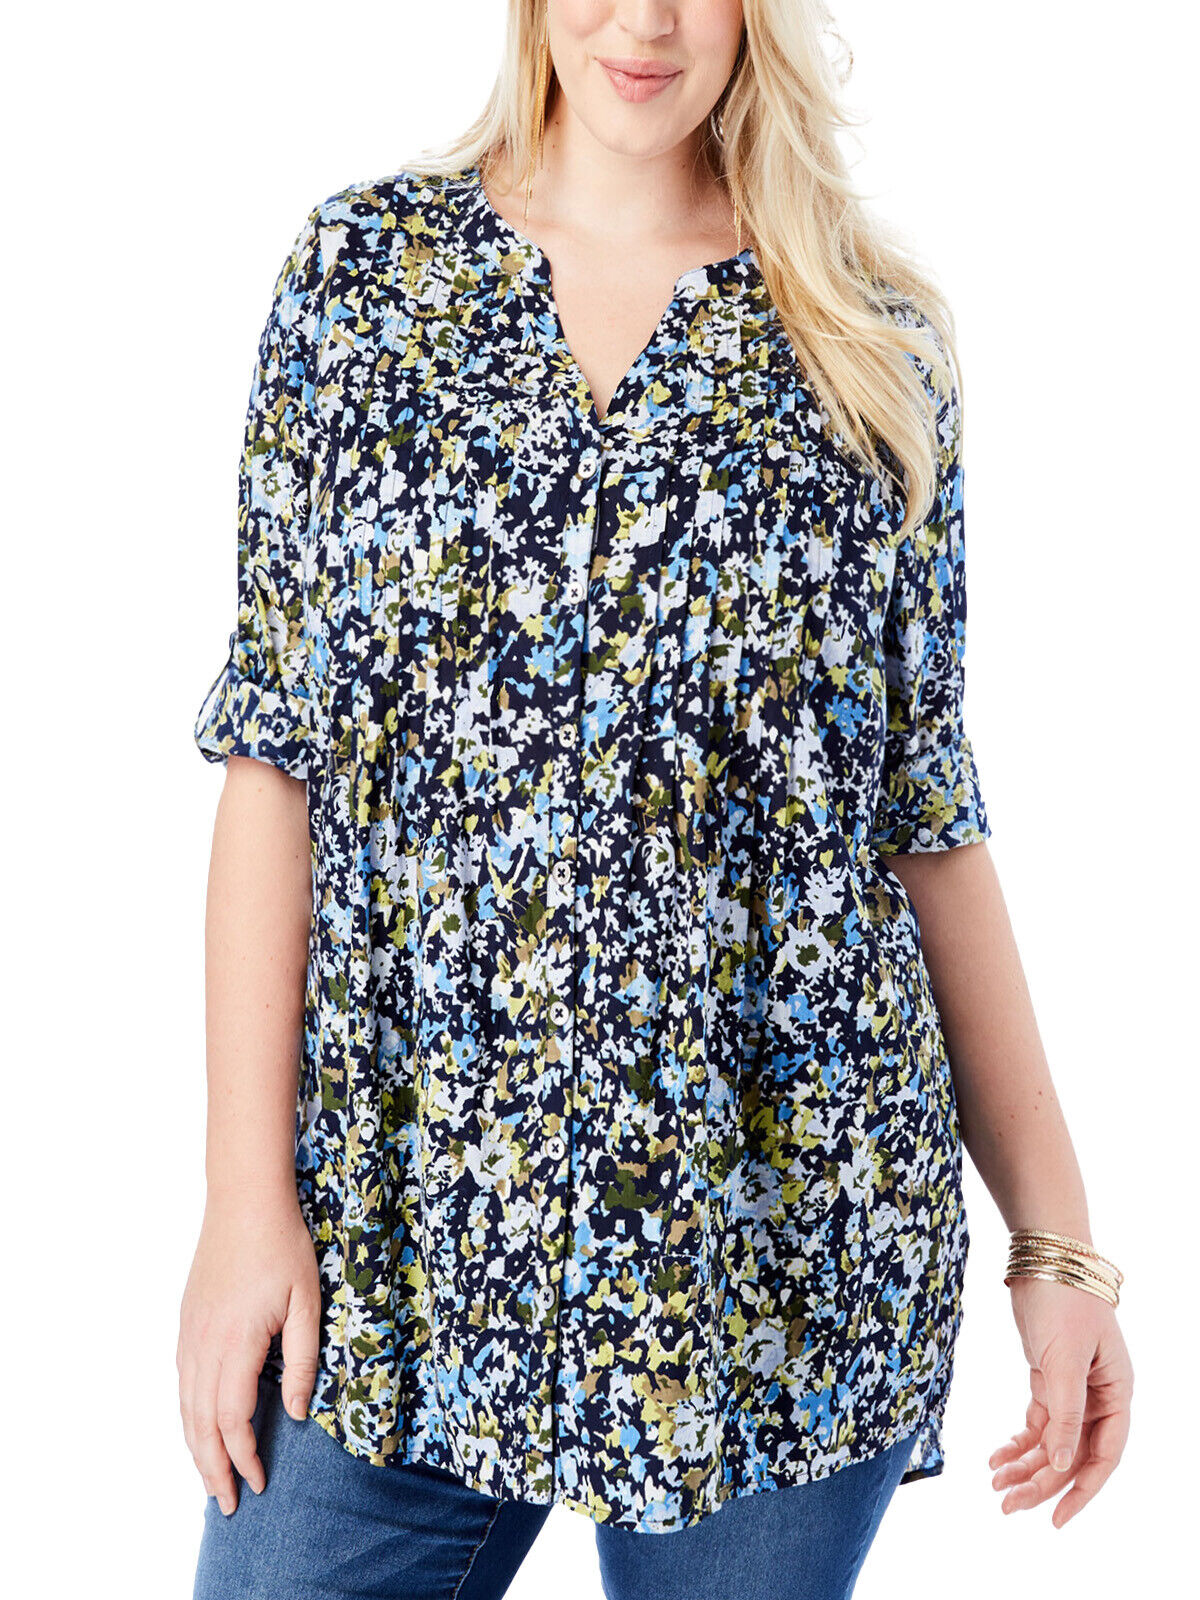 Roamans Blue Floral High-Low Pintuck Cotton Tunic in UK Sizes 20, 22, 32, 34